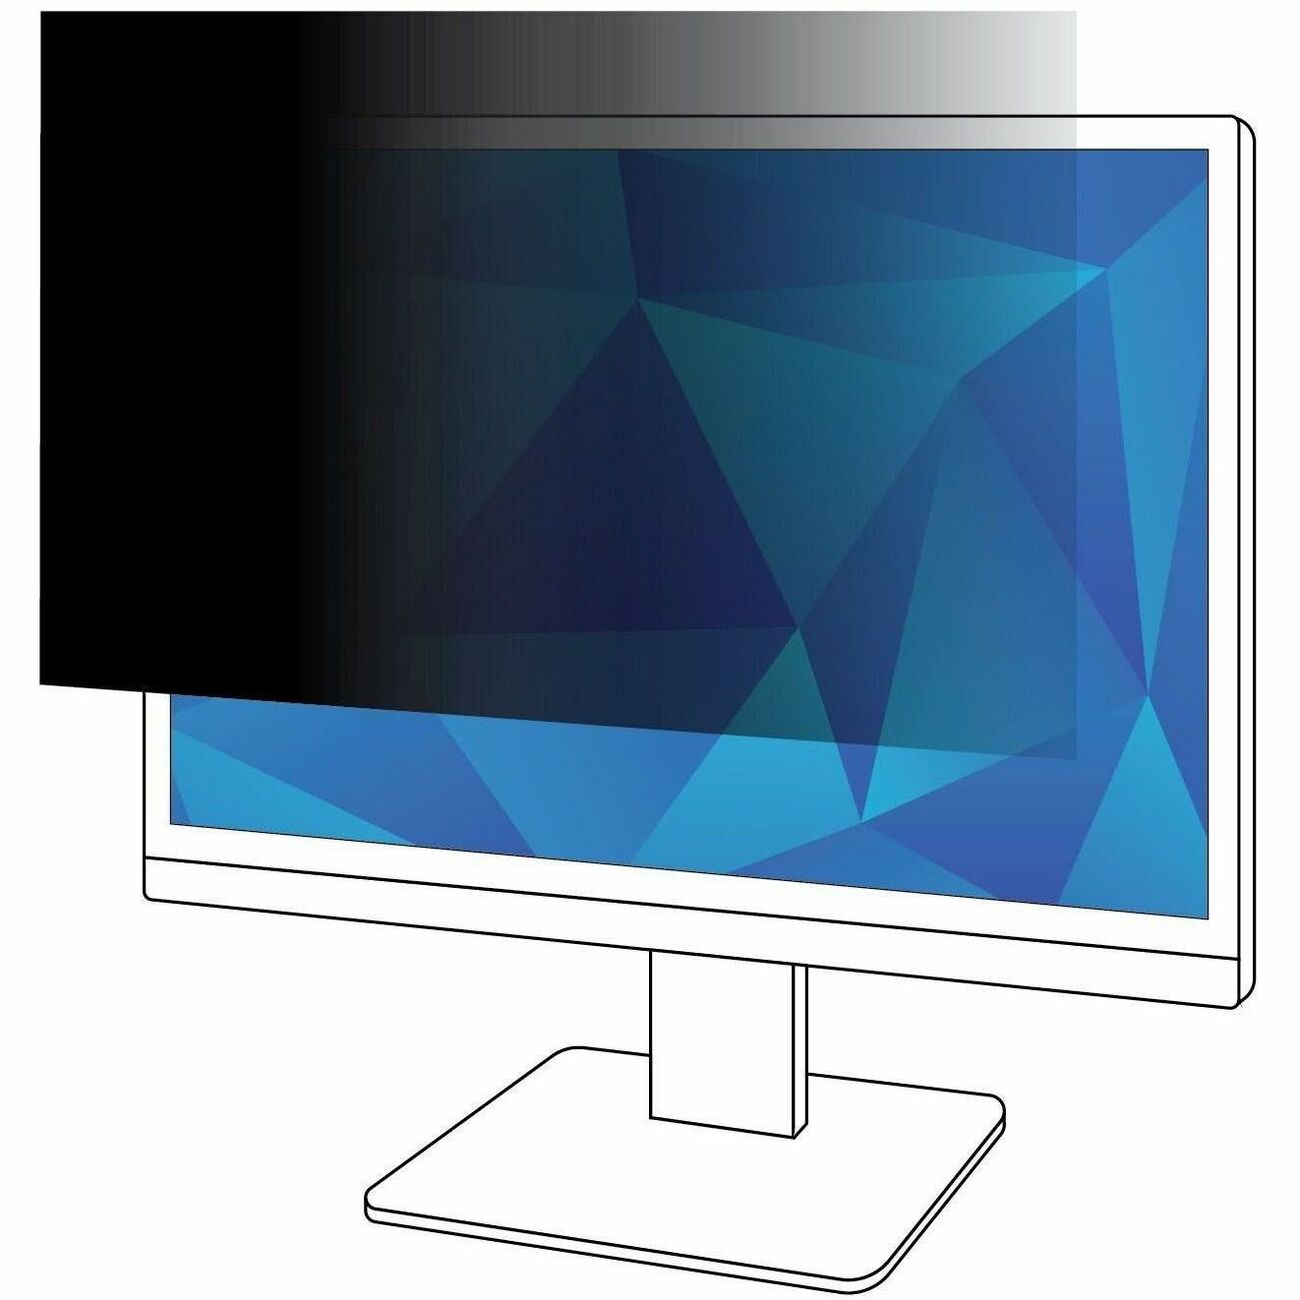 3m-privacy-filter-for-27in-monitor-1610-pf270w1b-for-27-widescreen-lcd-monitor-1610-scratch-resistant-fingerprint-resistant-dust-resistant-anti-glare_mmmpf270w1b - 1